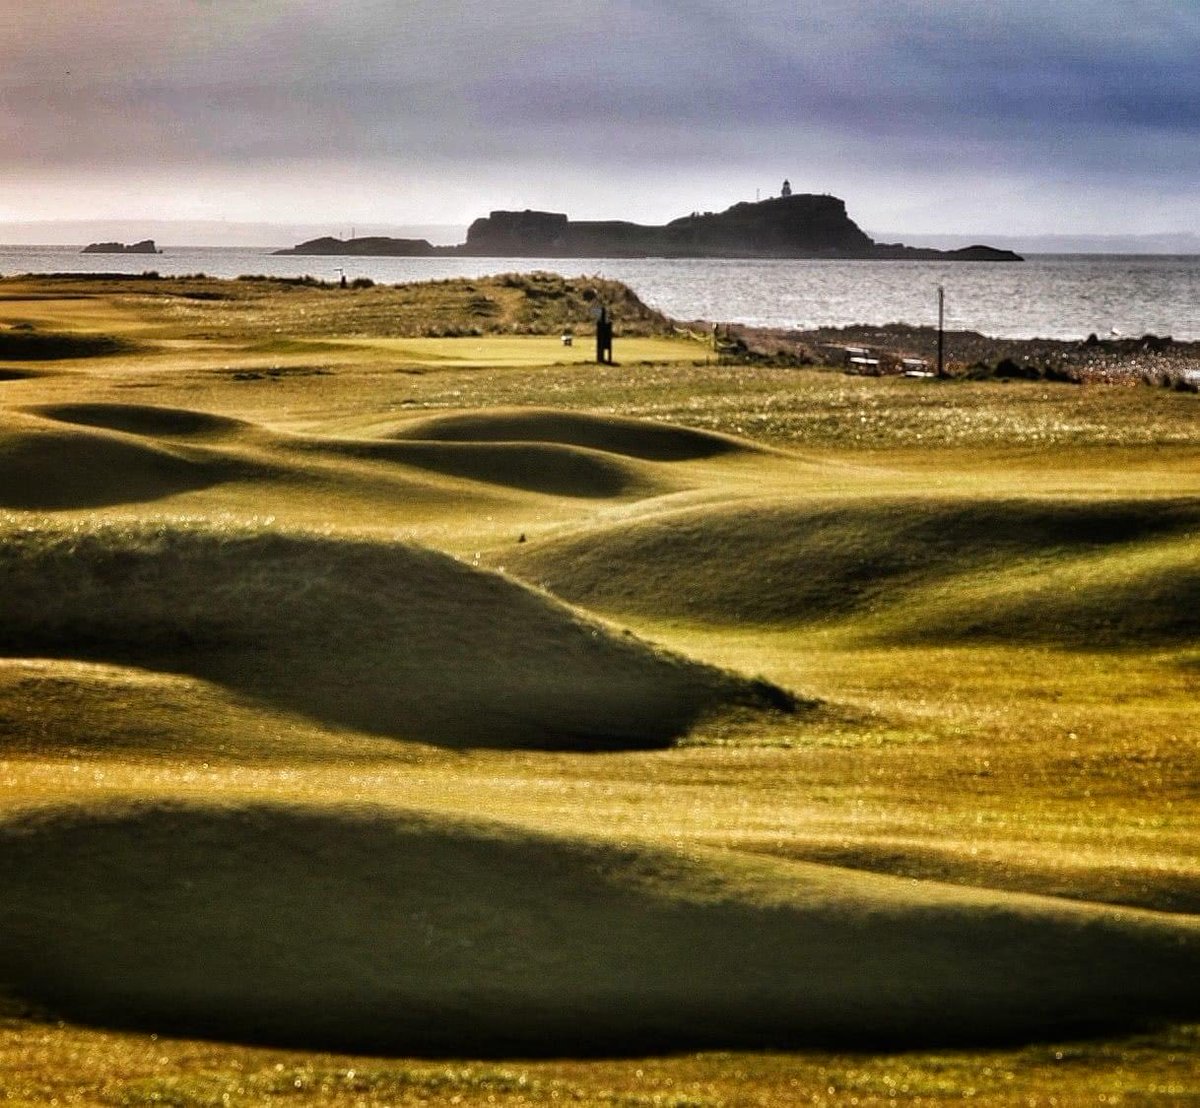 An unusual view of the West Links ⁦@NorthBerwick_GC⁩ which I hadn’t seen before. Beautiful. Pic credit: Charles Harkin.